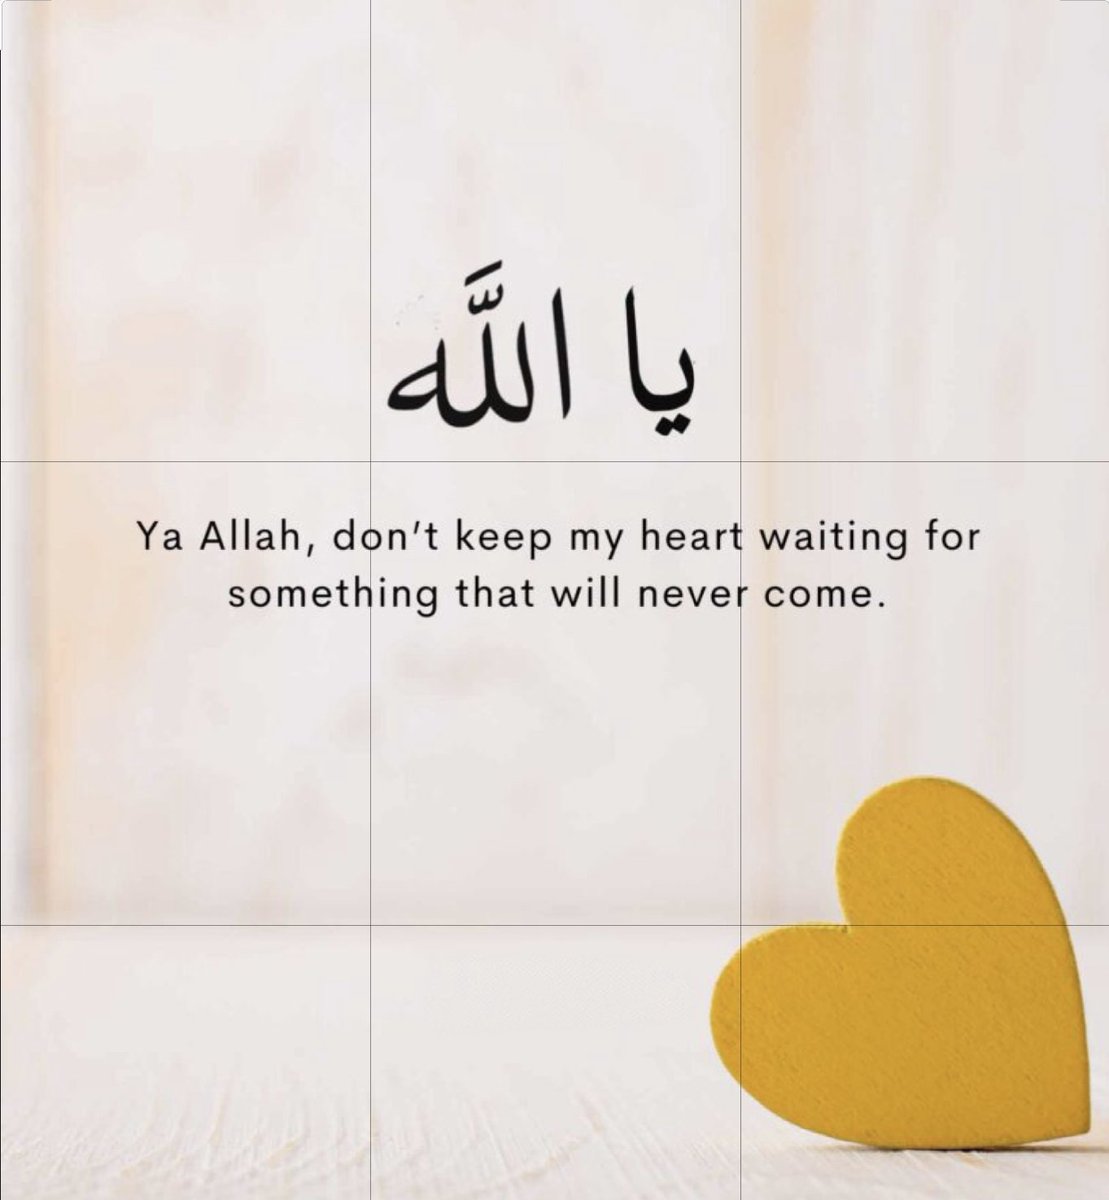 Ya Allah, don't keep my heart waiting for something that will never come. 🤲❤️

#Islam #Muslim #Quran